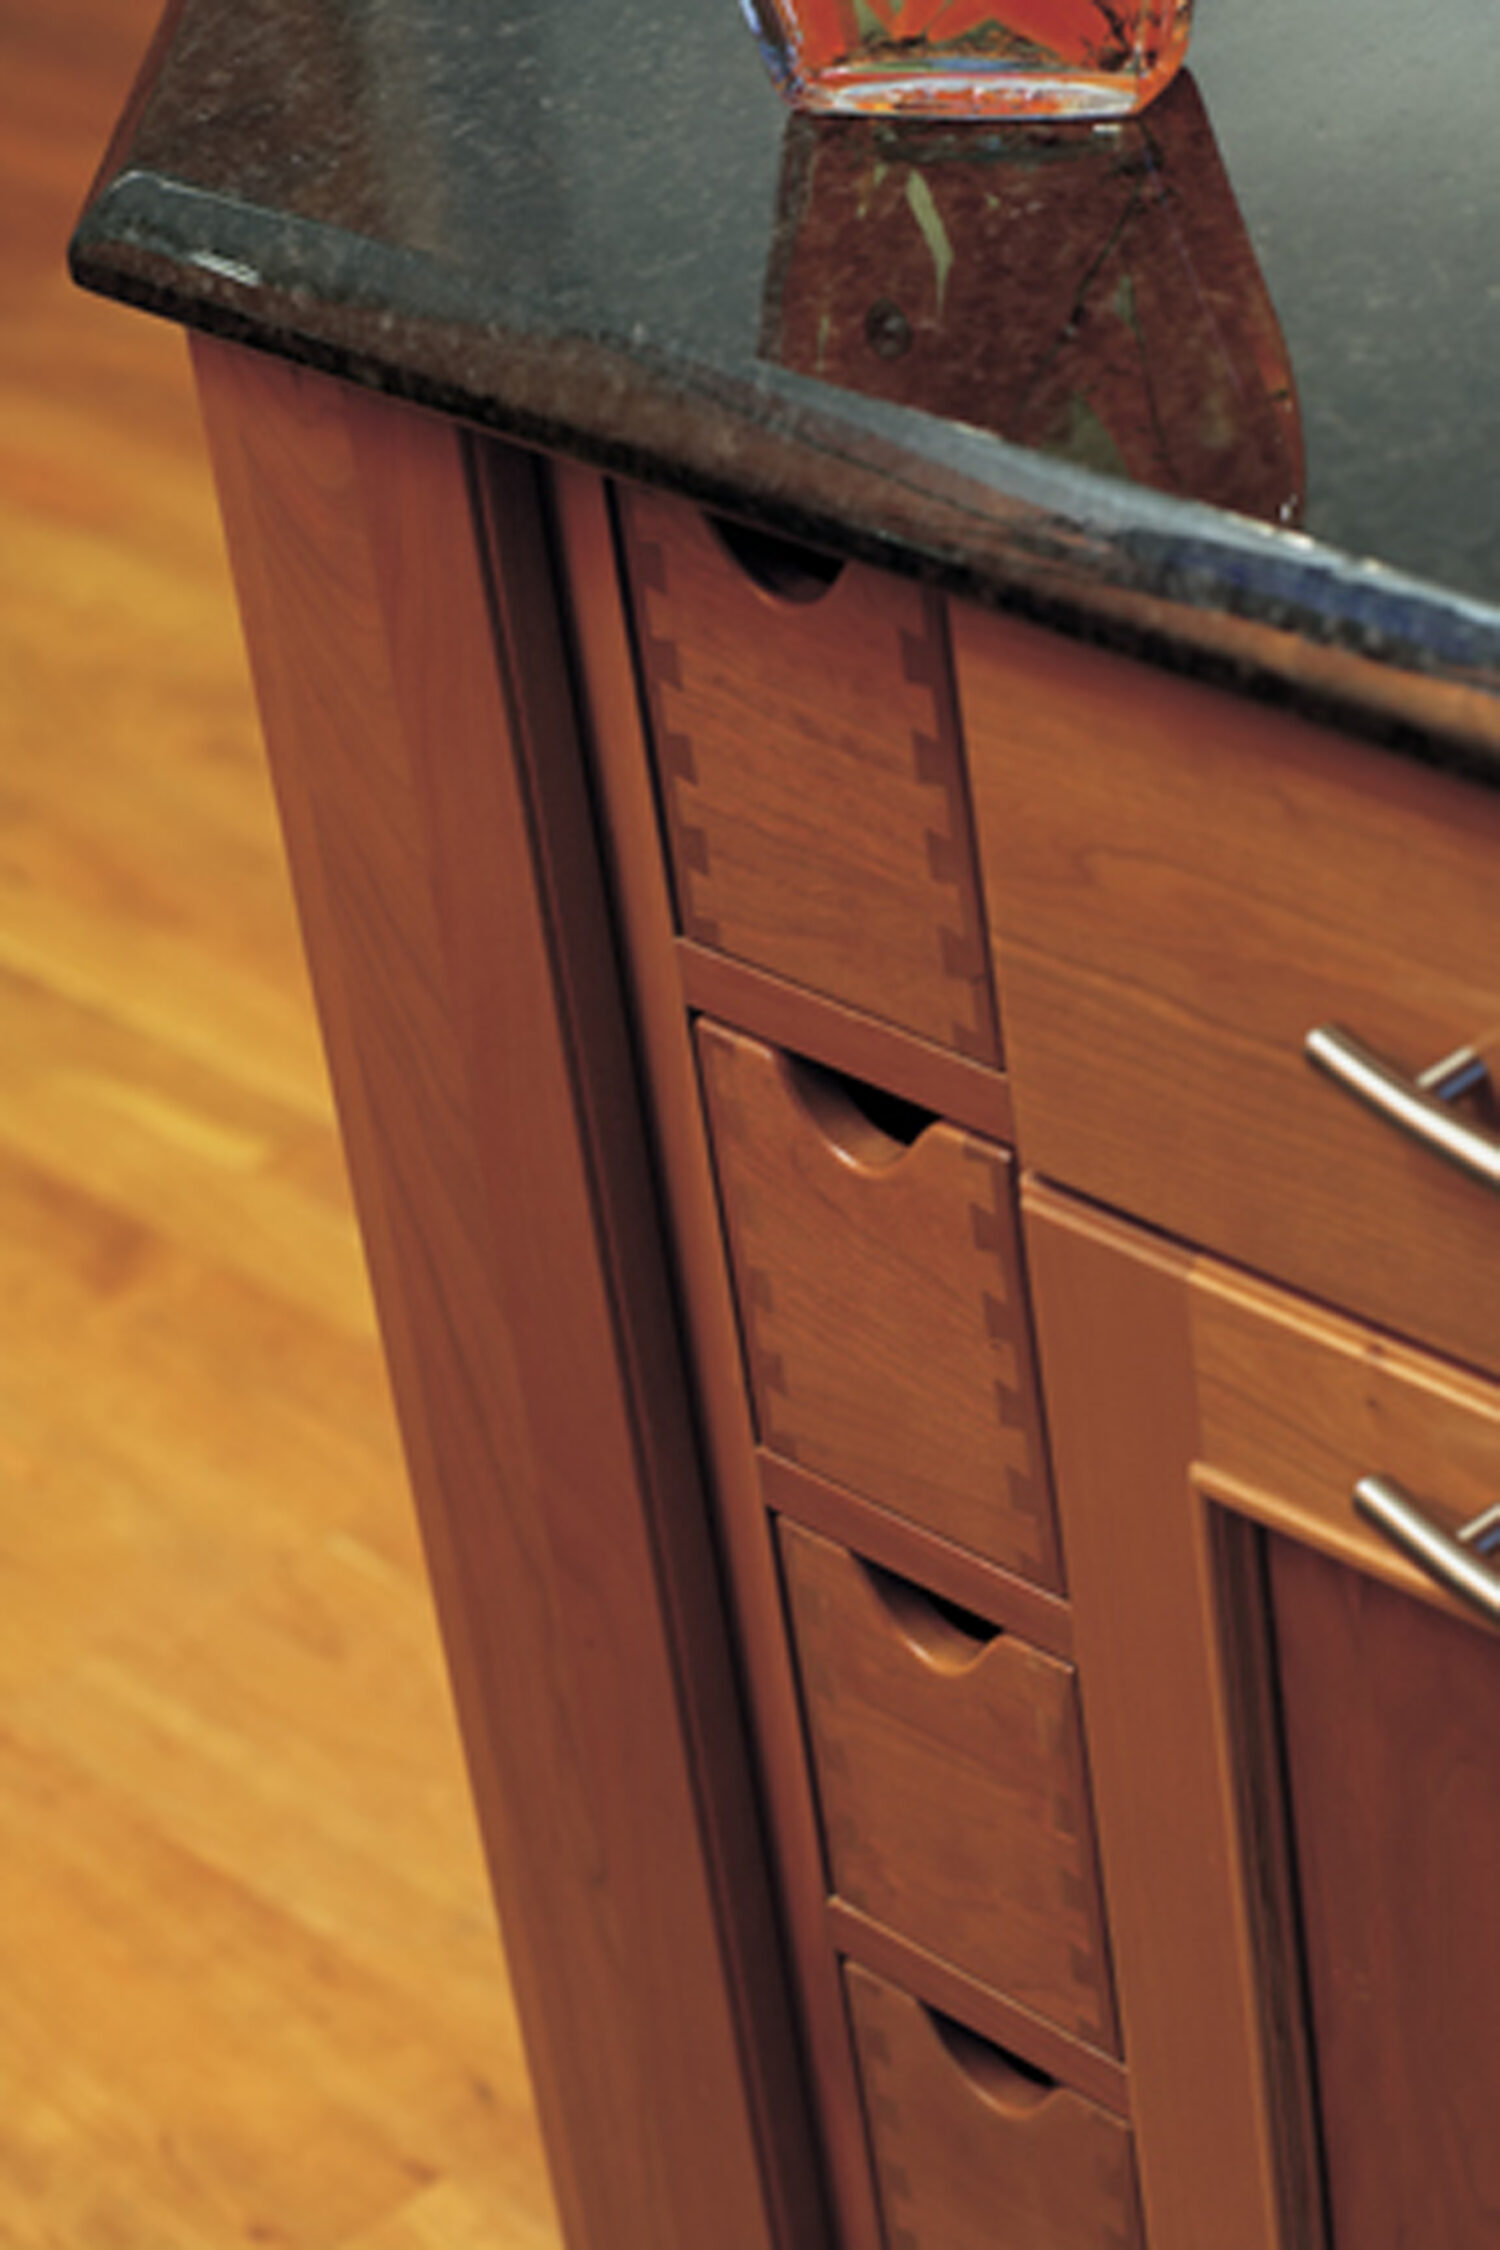 Vertical apothecary drawers in a cherry wood kitchen island with a rich-warm stain color. Kitchen island cabinets and storage from Dura Supreme.